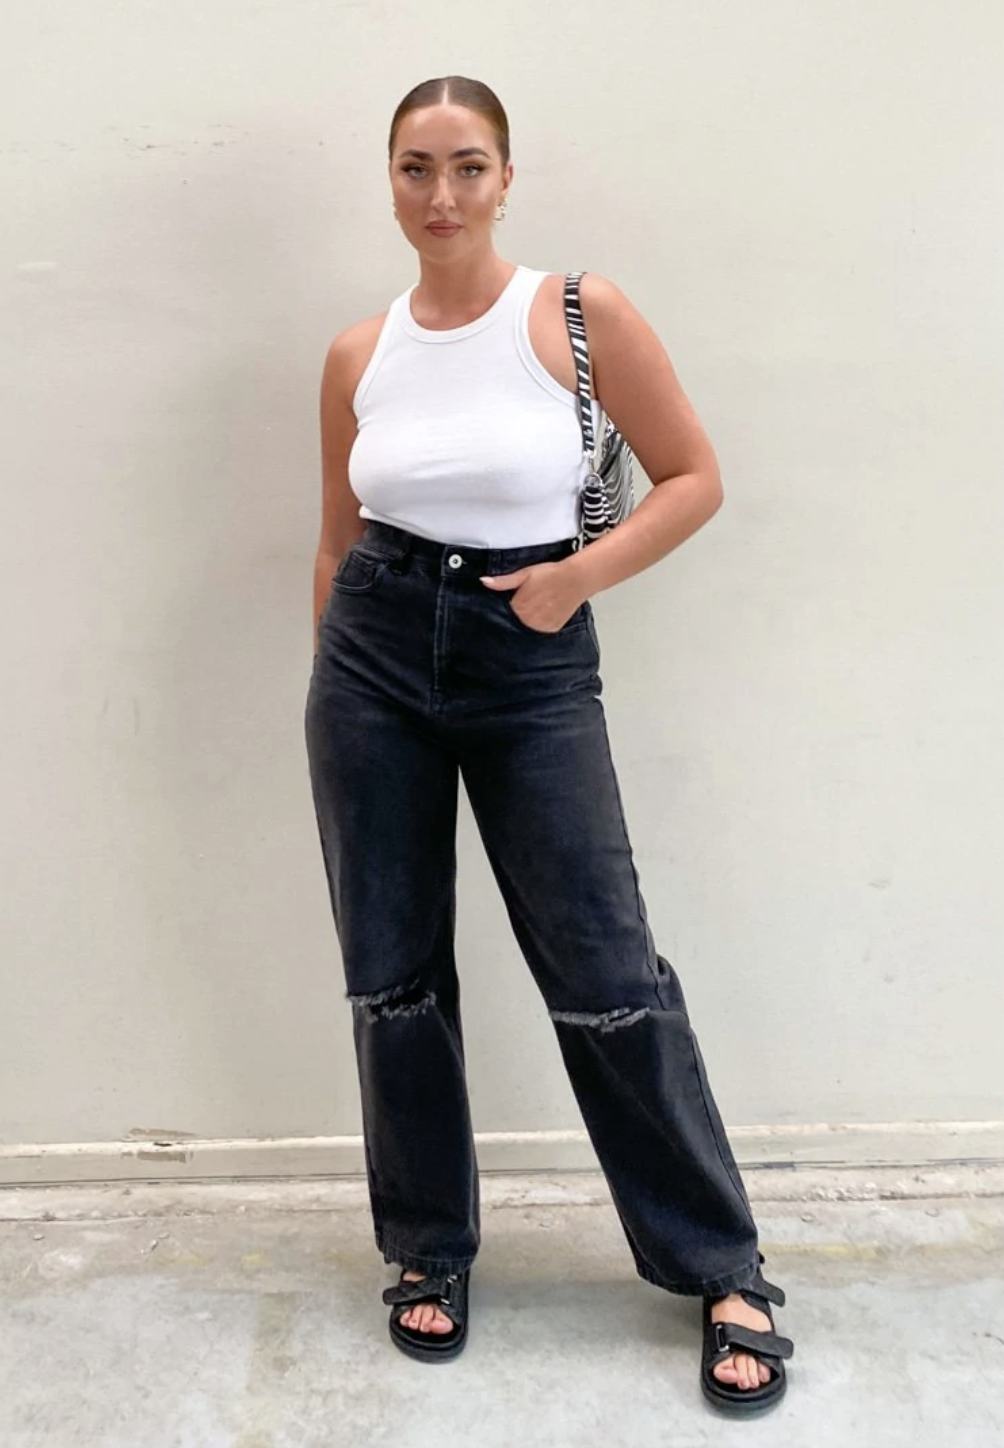 Model wearing black wide-leg jeans with ripped knees and white tank top